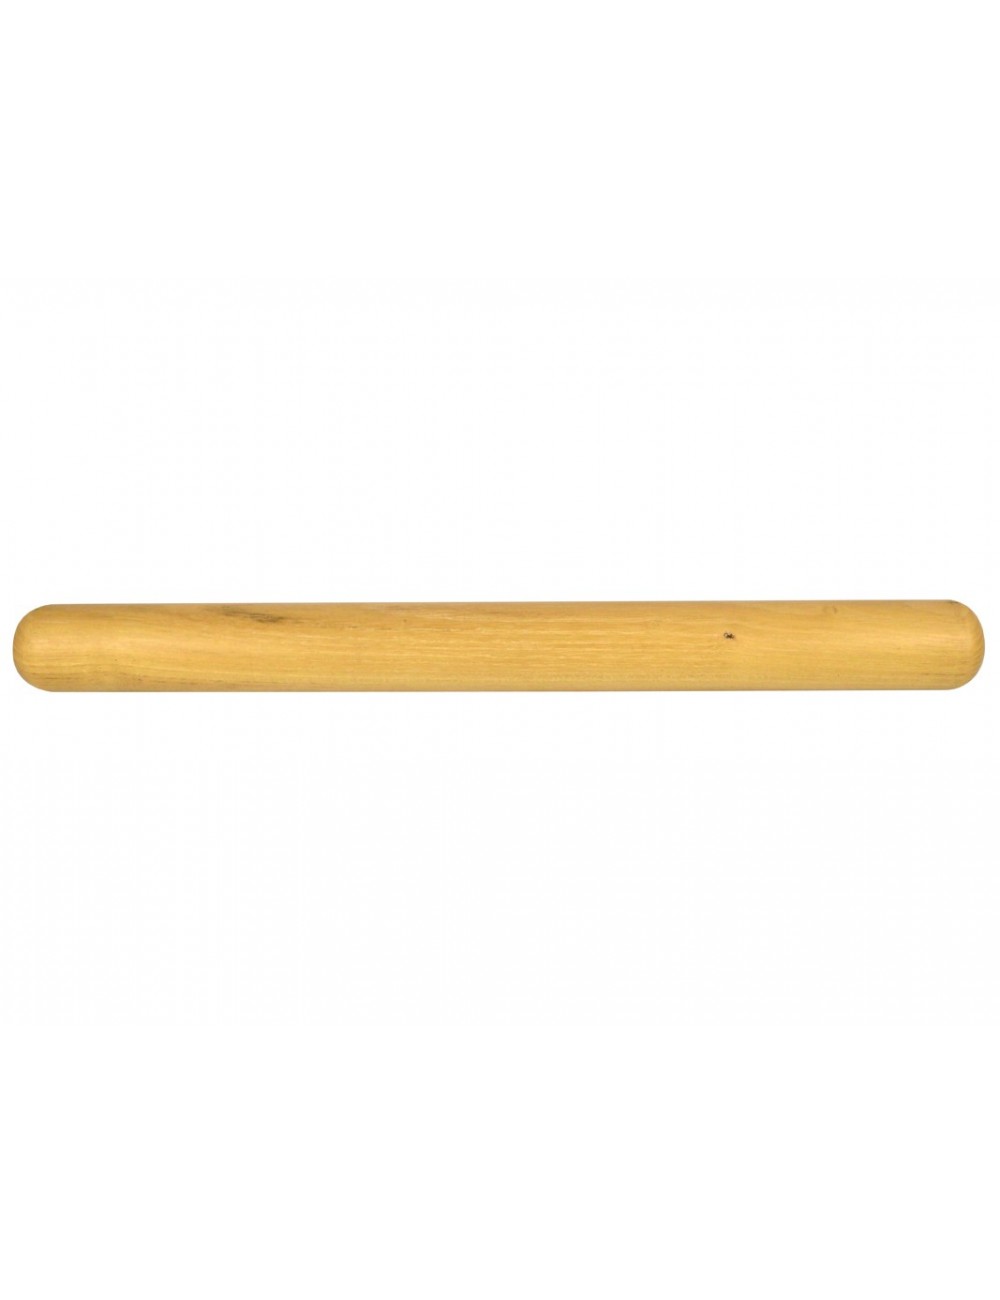 ACACIA PASTRY ROLLER